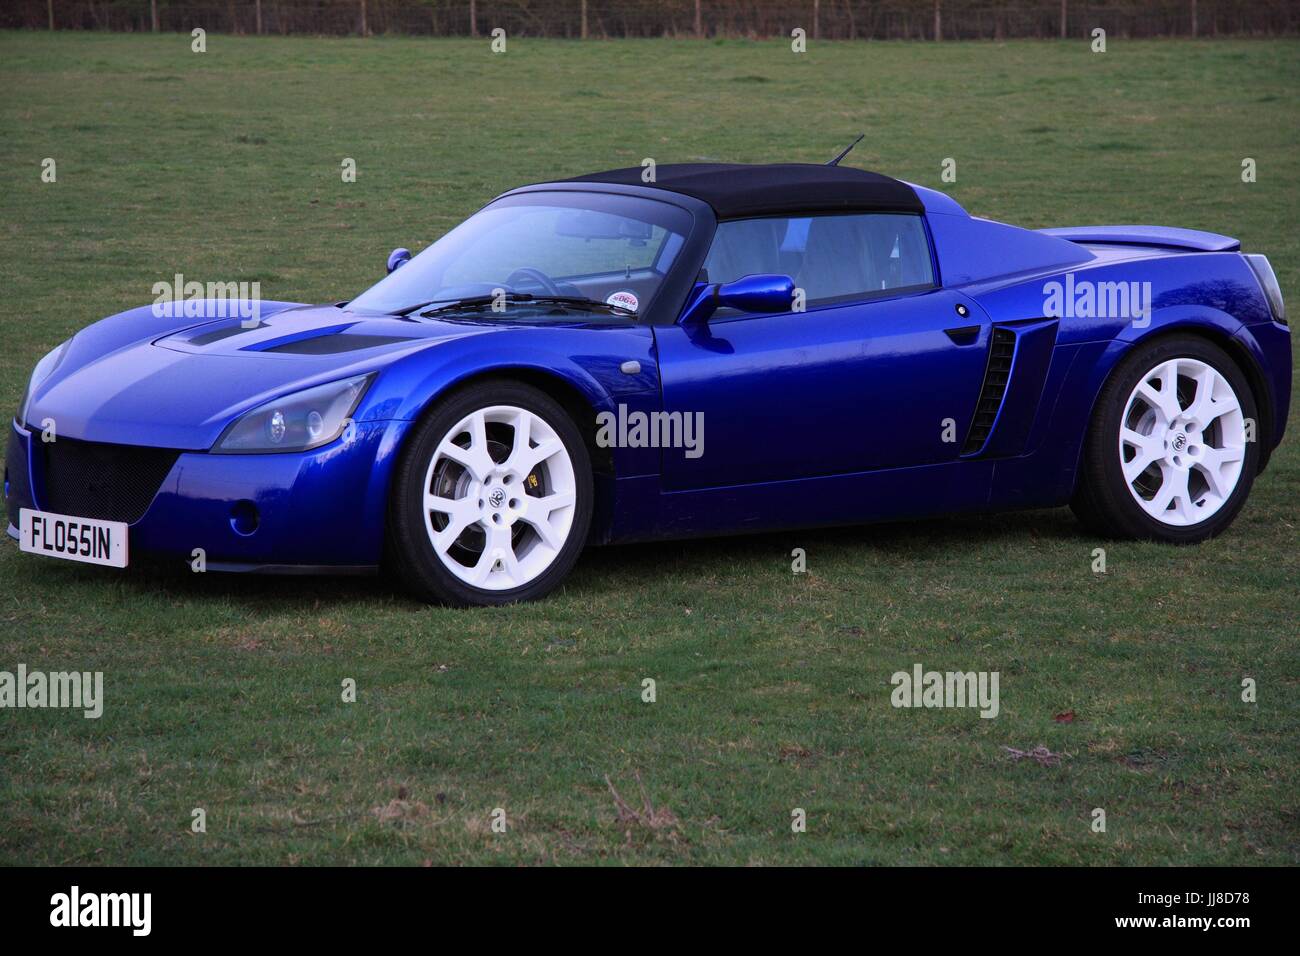 Vauxhall VX220 Turbo lost in a field Stock Photo